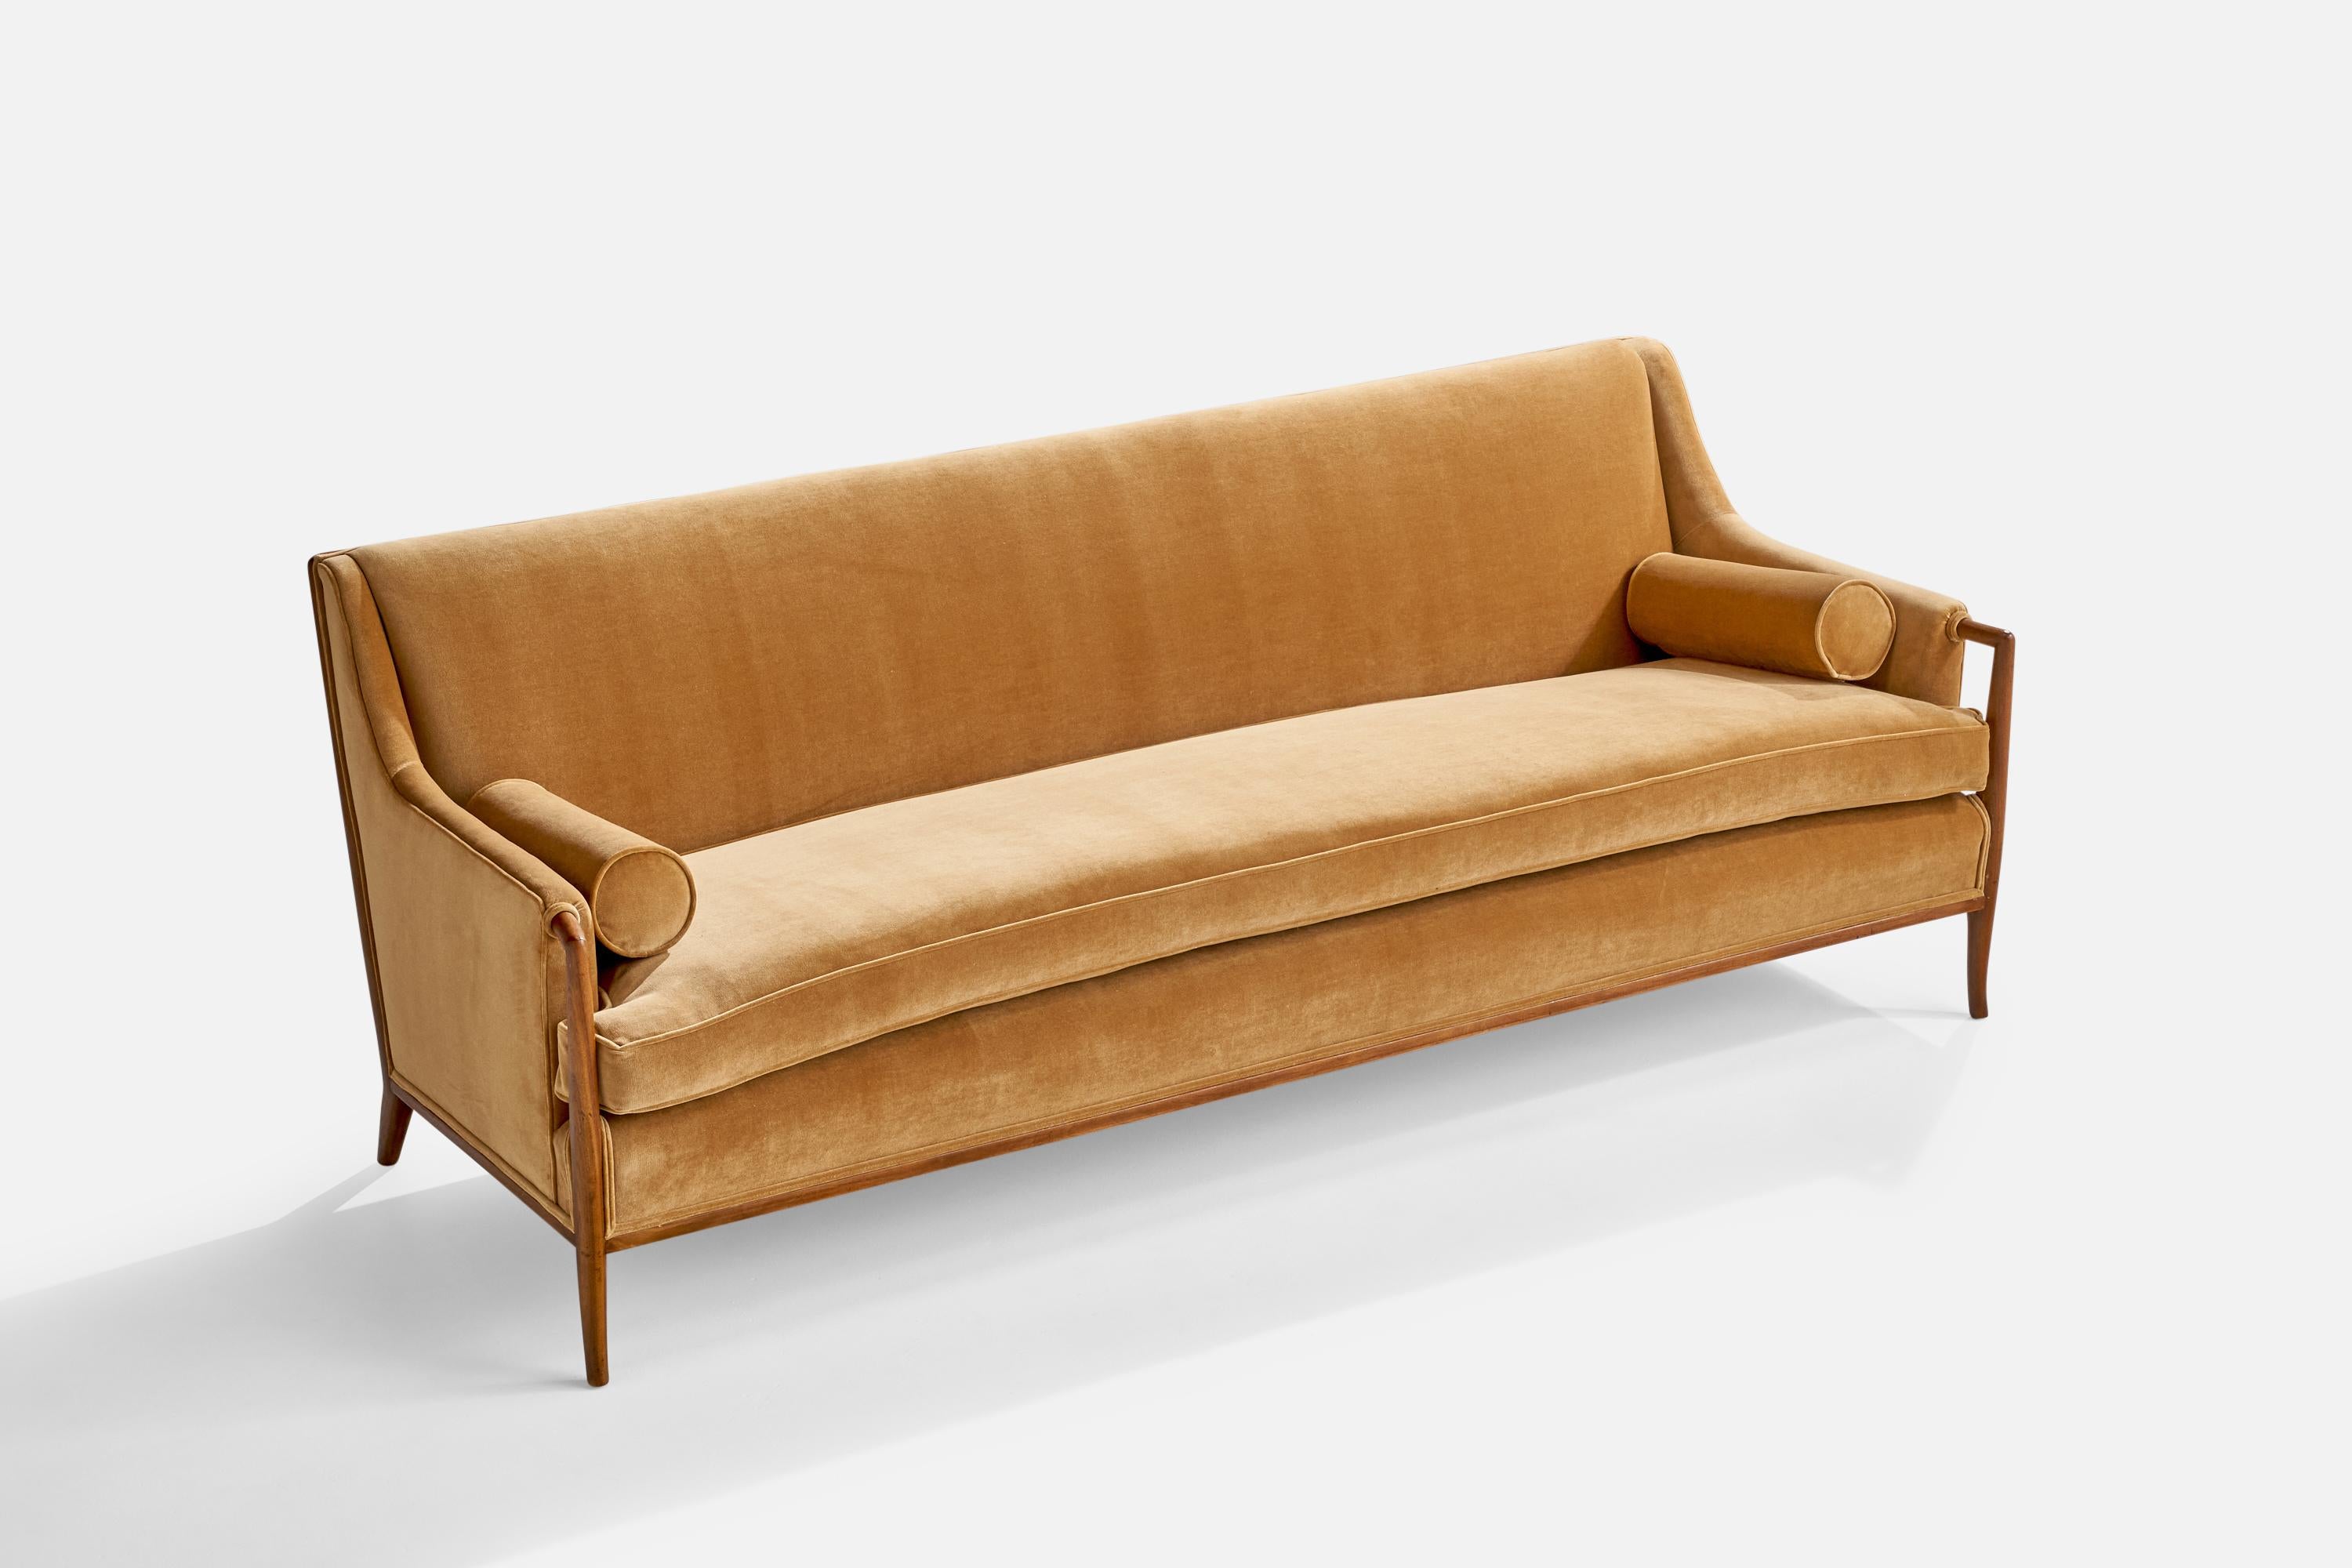 A walnut and beige velvet fabric sofa designed by T.H. Robsjohn-Gibbings and produced by Widdicomb Furniture Company, Grand Rapids, Michigan, USA, 1950s.

Seat height 19.5”